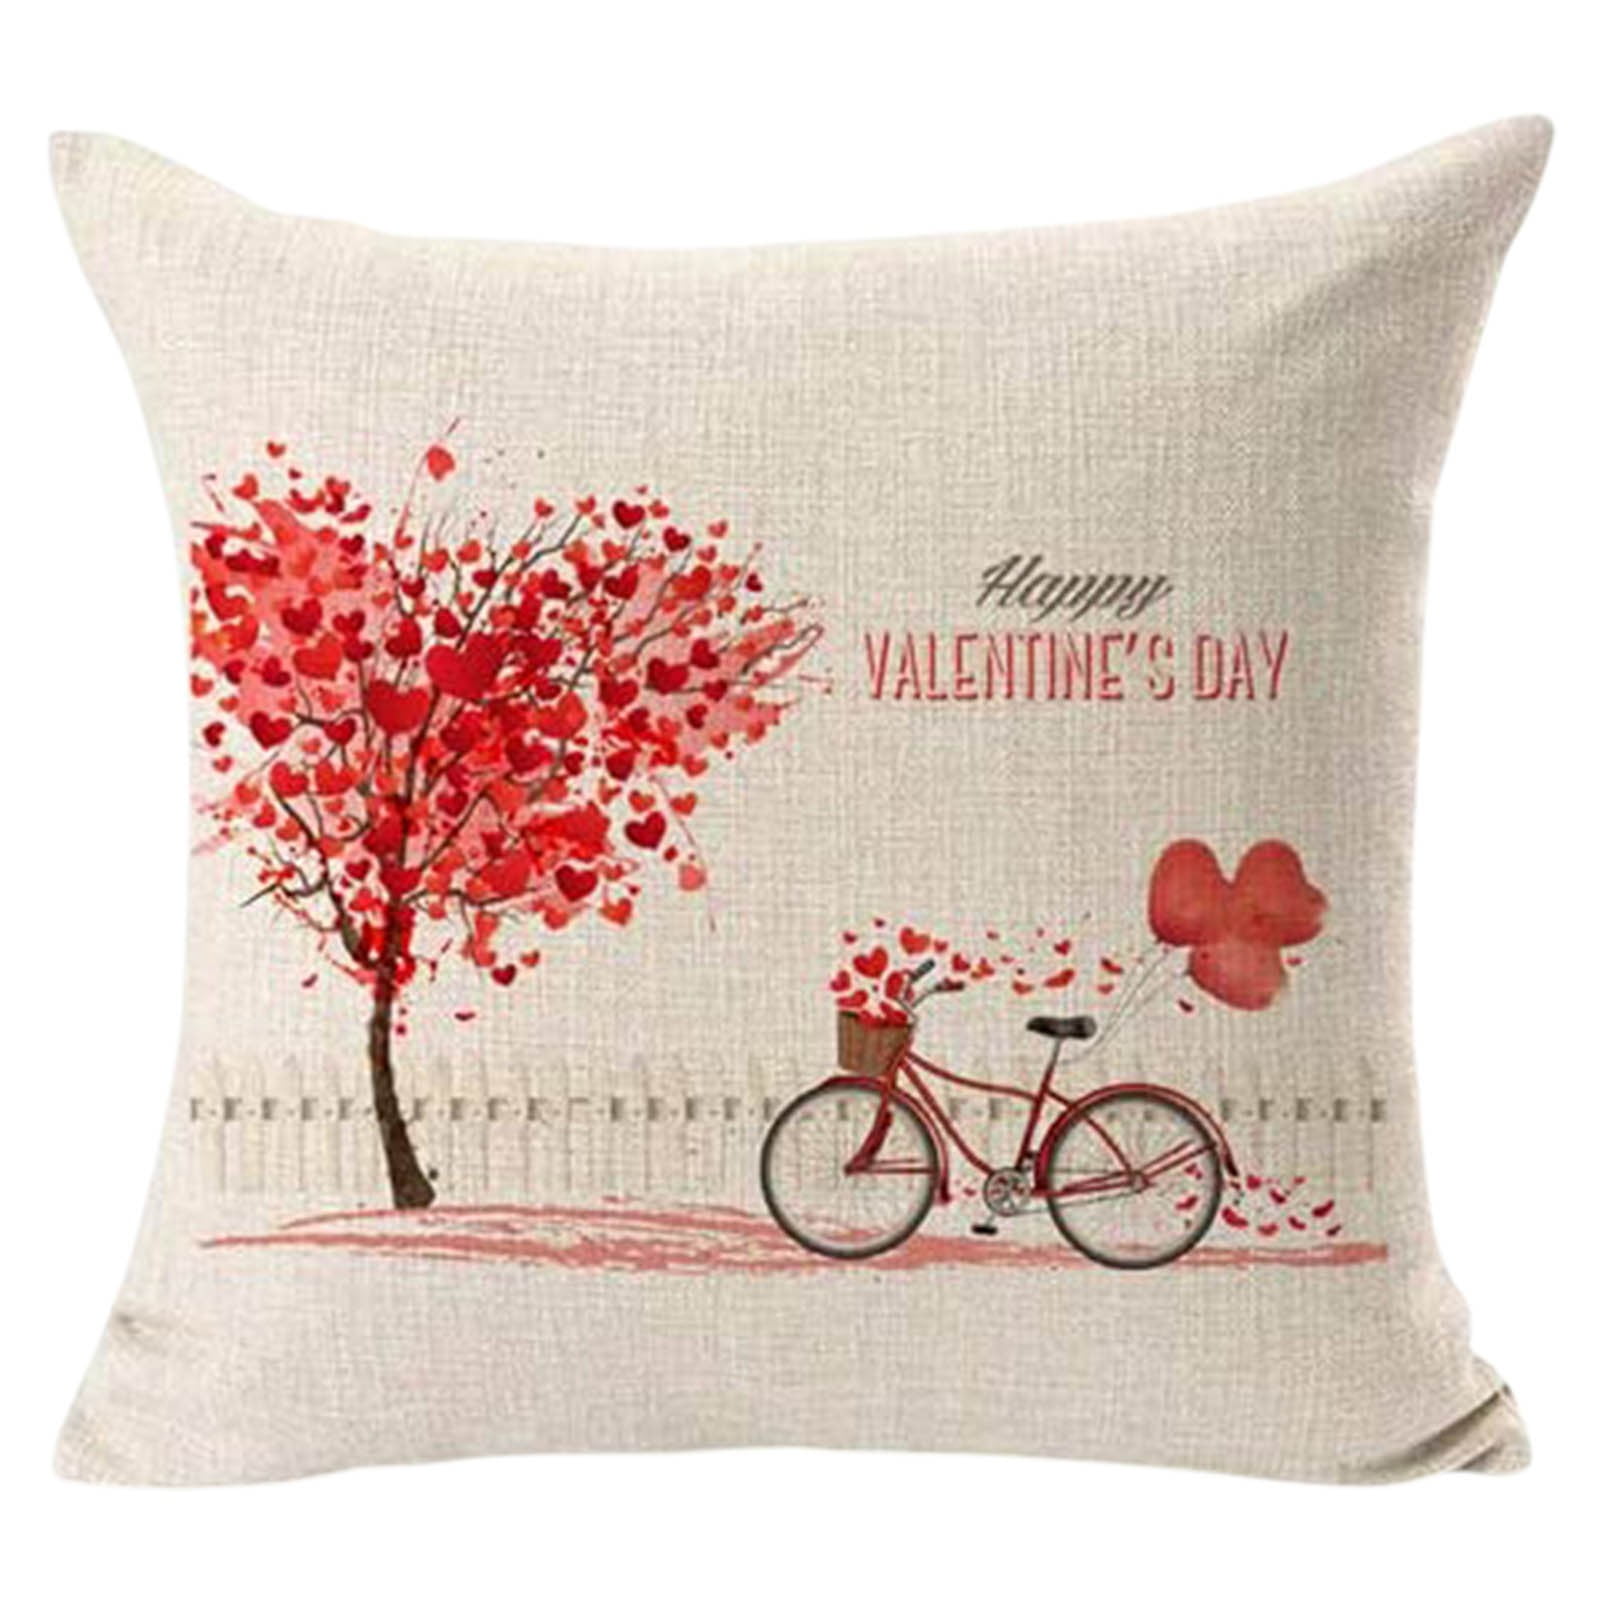 Mllkcao 1PC Valentines Day Gifts for Lovers Faceless Doll Heart Pillow Case Sofa Throw Cushion Cover for Home Living Room Sofa Bed Pillowcases Home Decoration Romantic Gifts for Women 